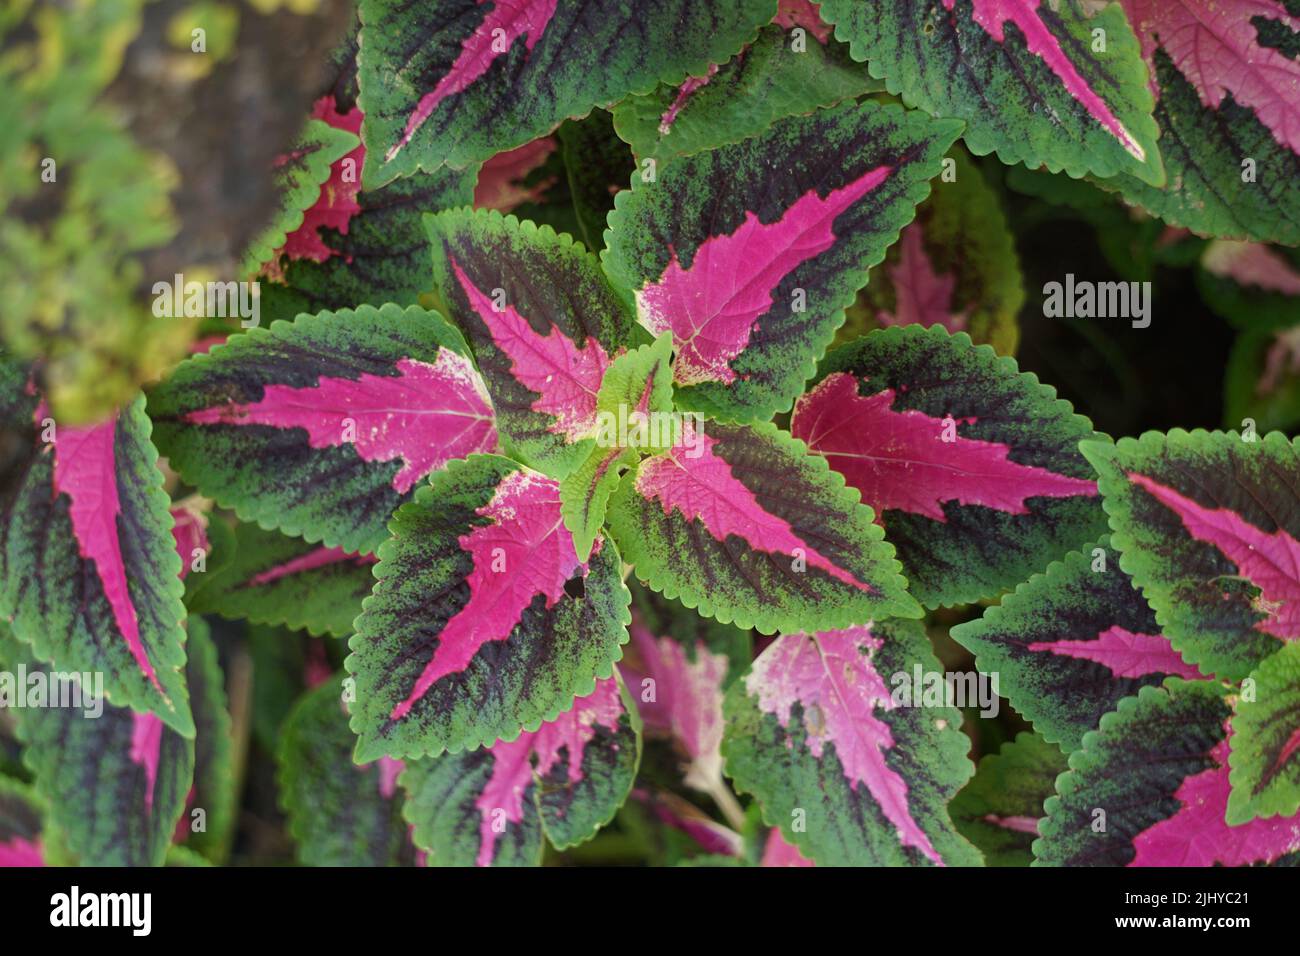 Coleus scutellarioides with a natural background Stock Photo